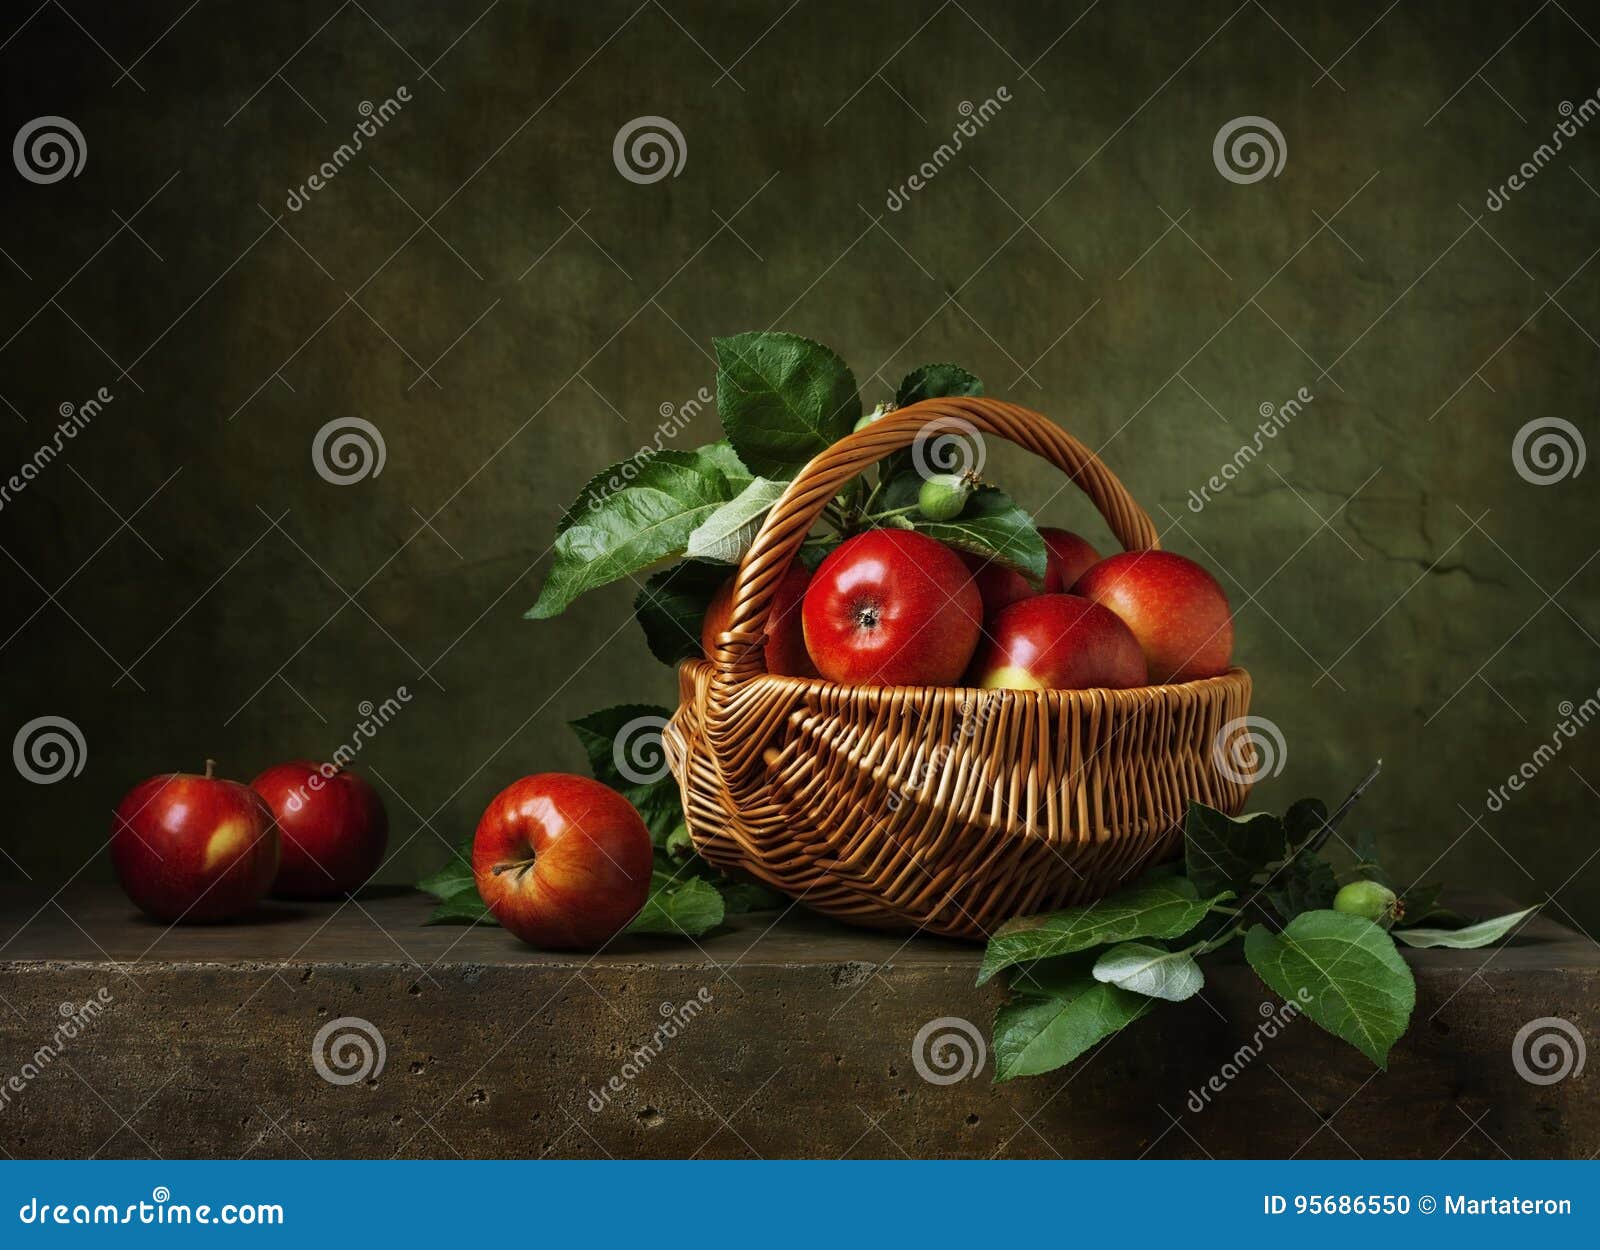 still life with apples in basket